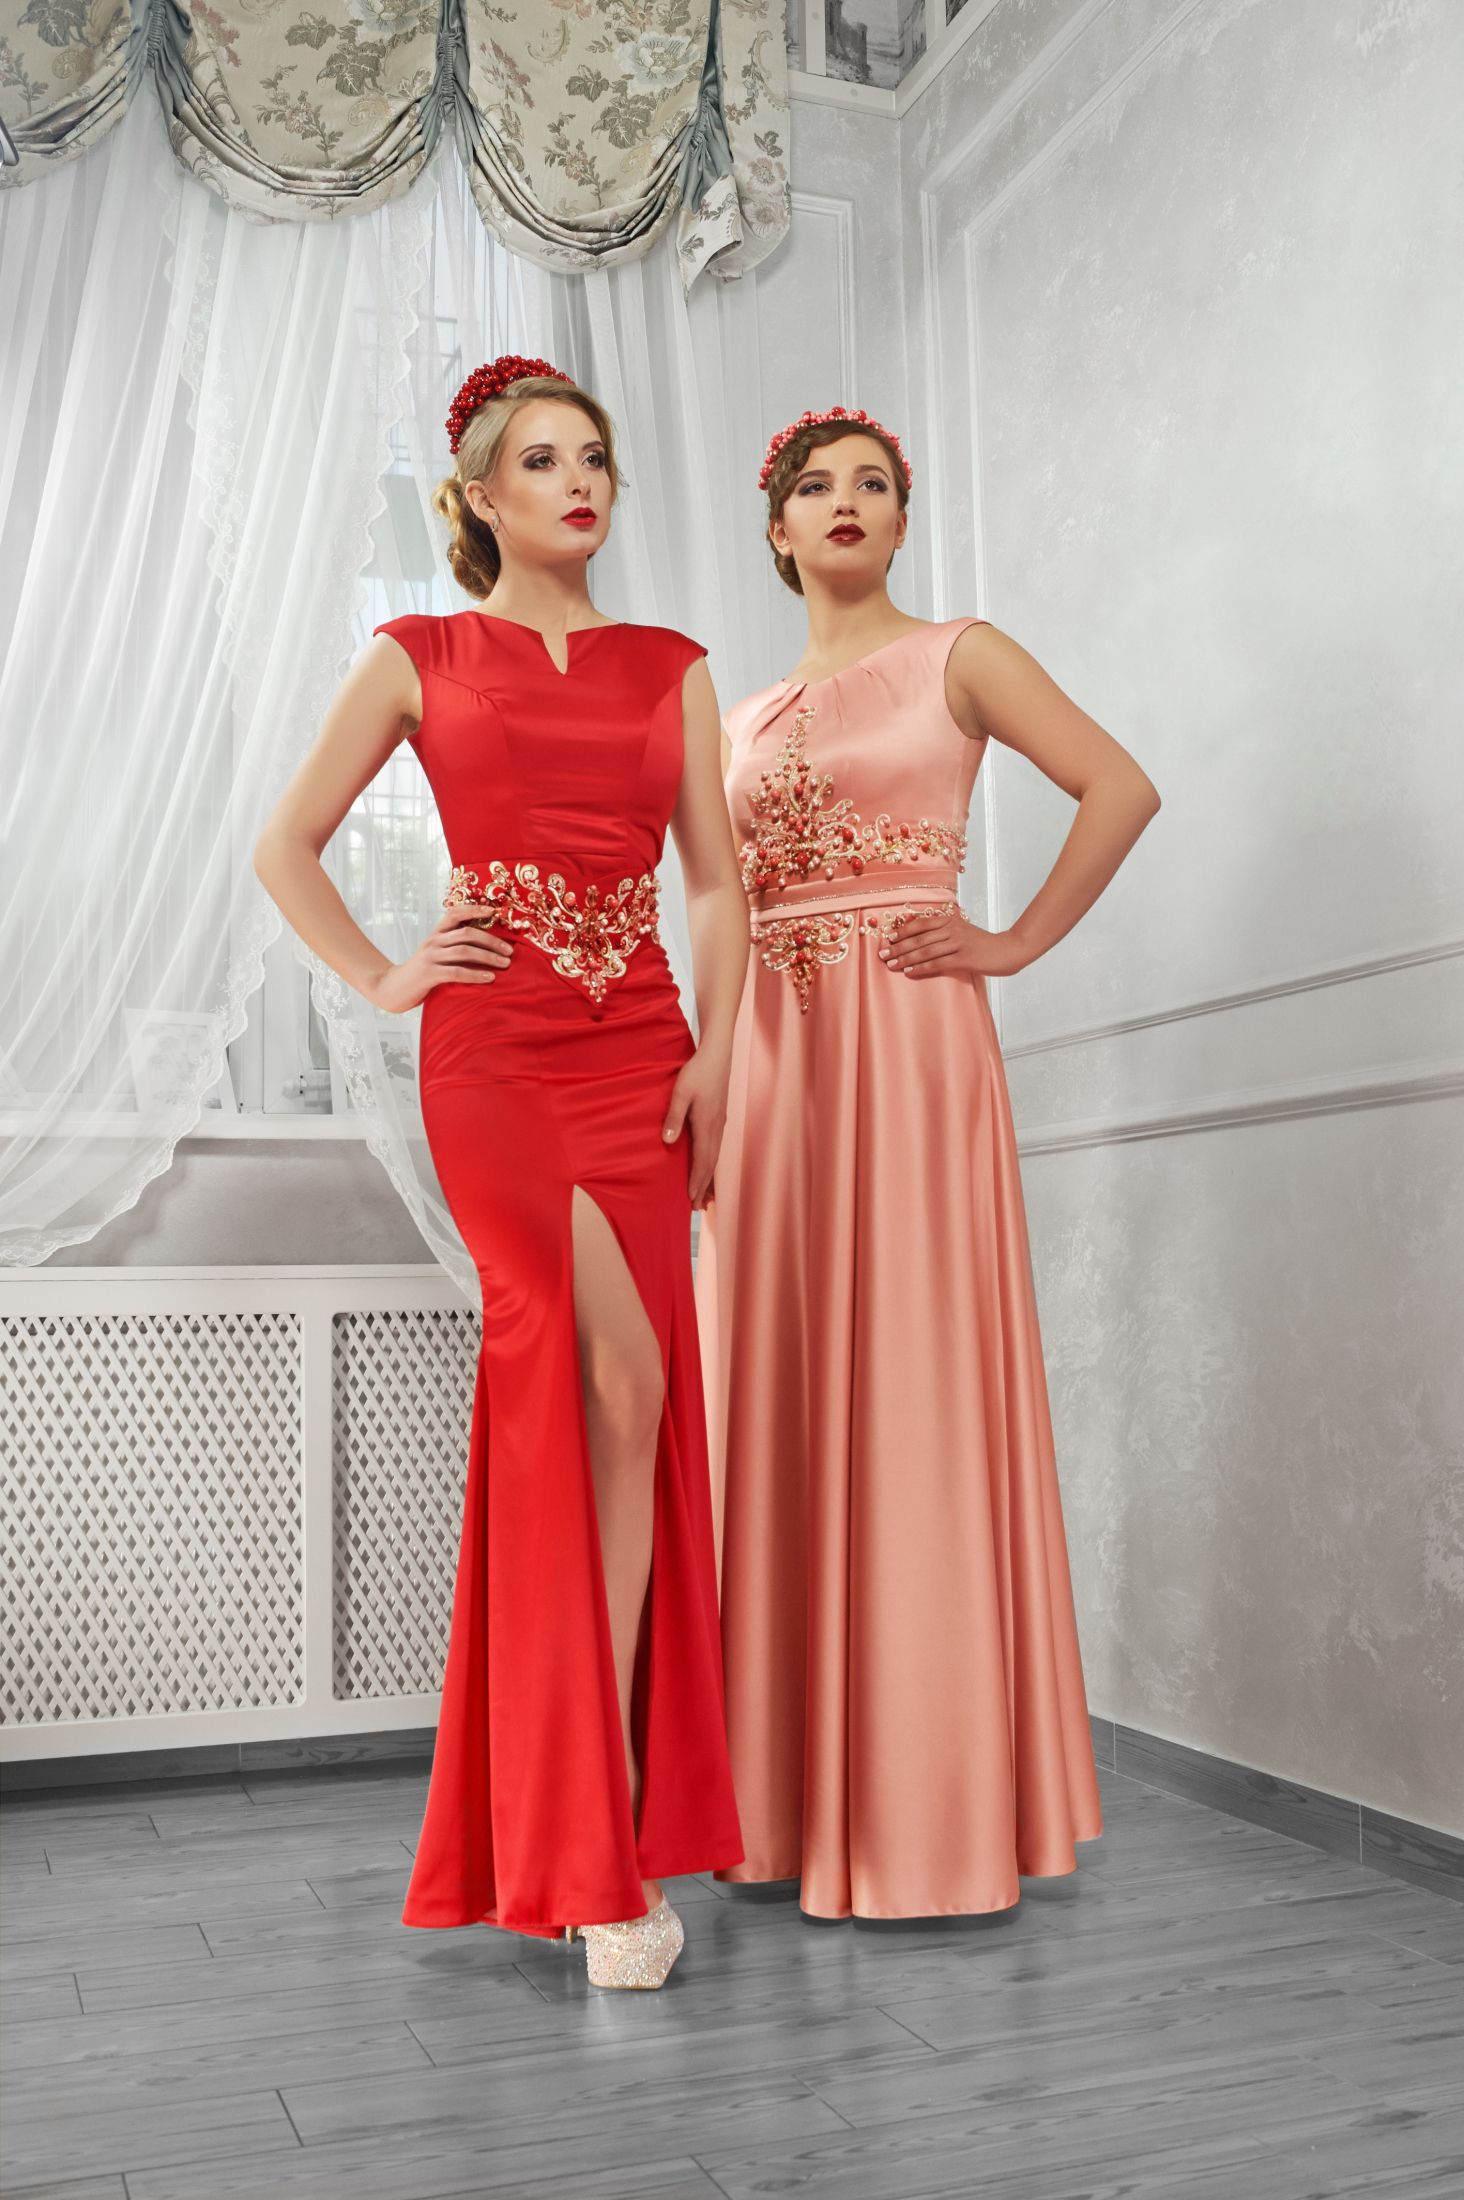 two-young-beautiful-women-in-long-evening-red-and-peach-dresse.jpg